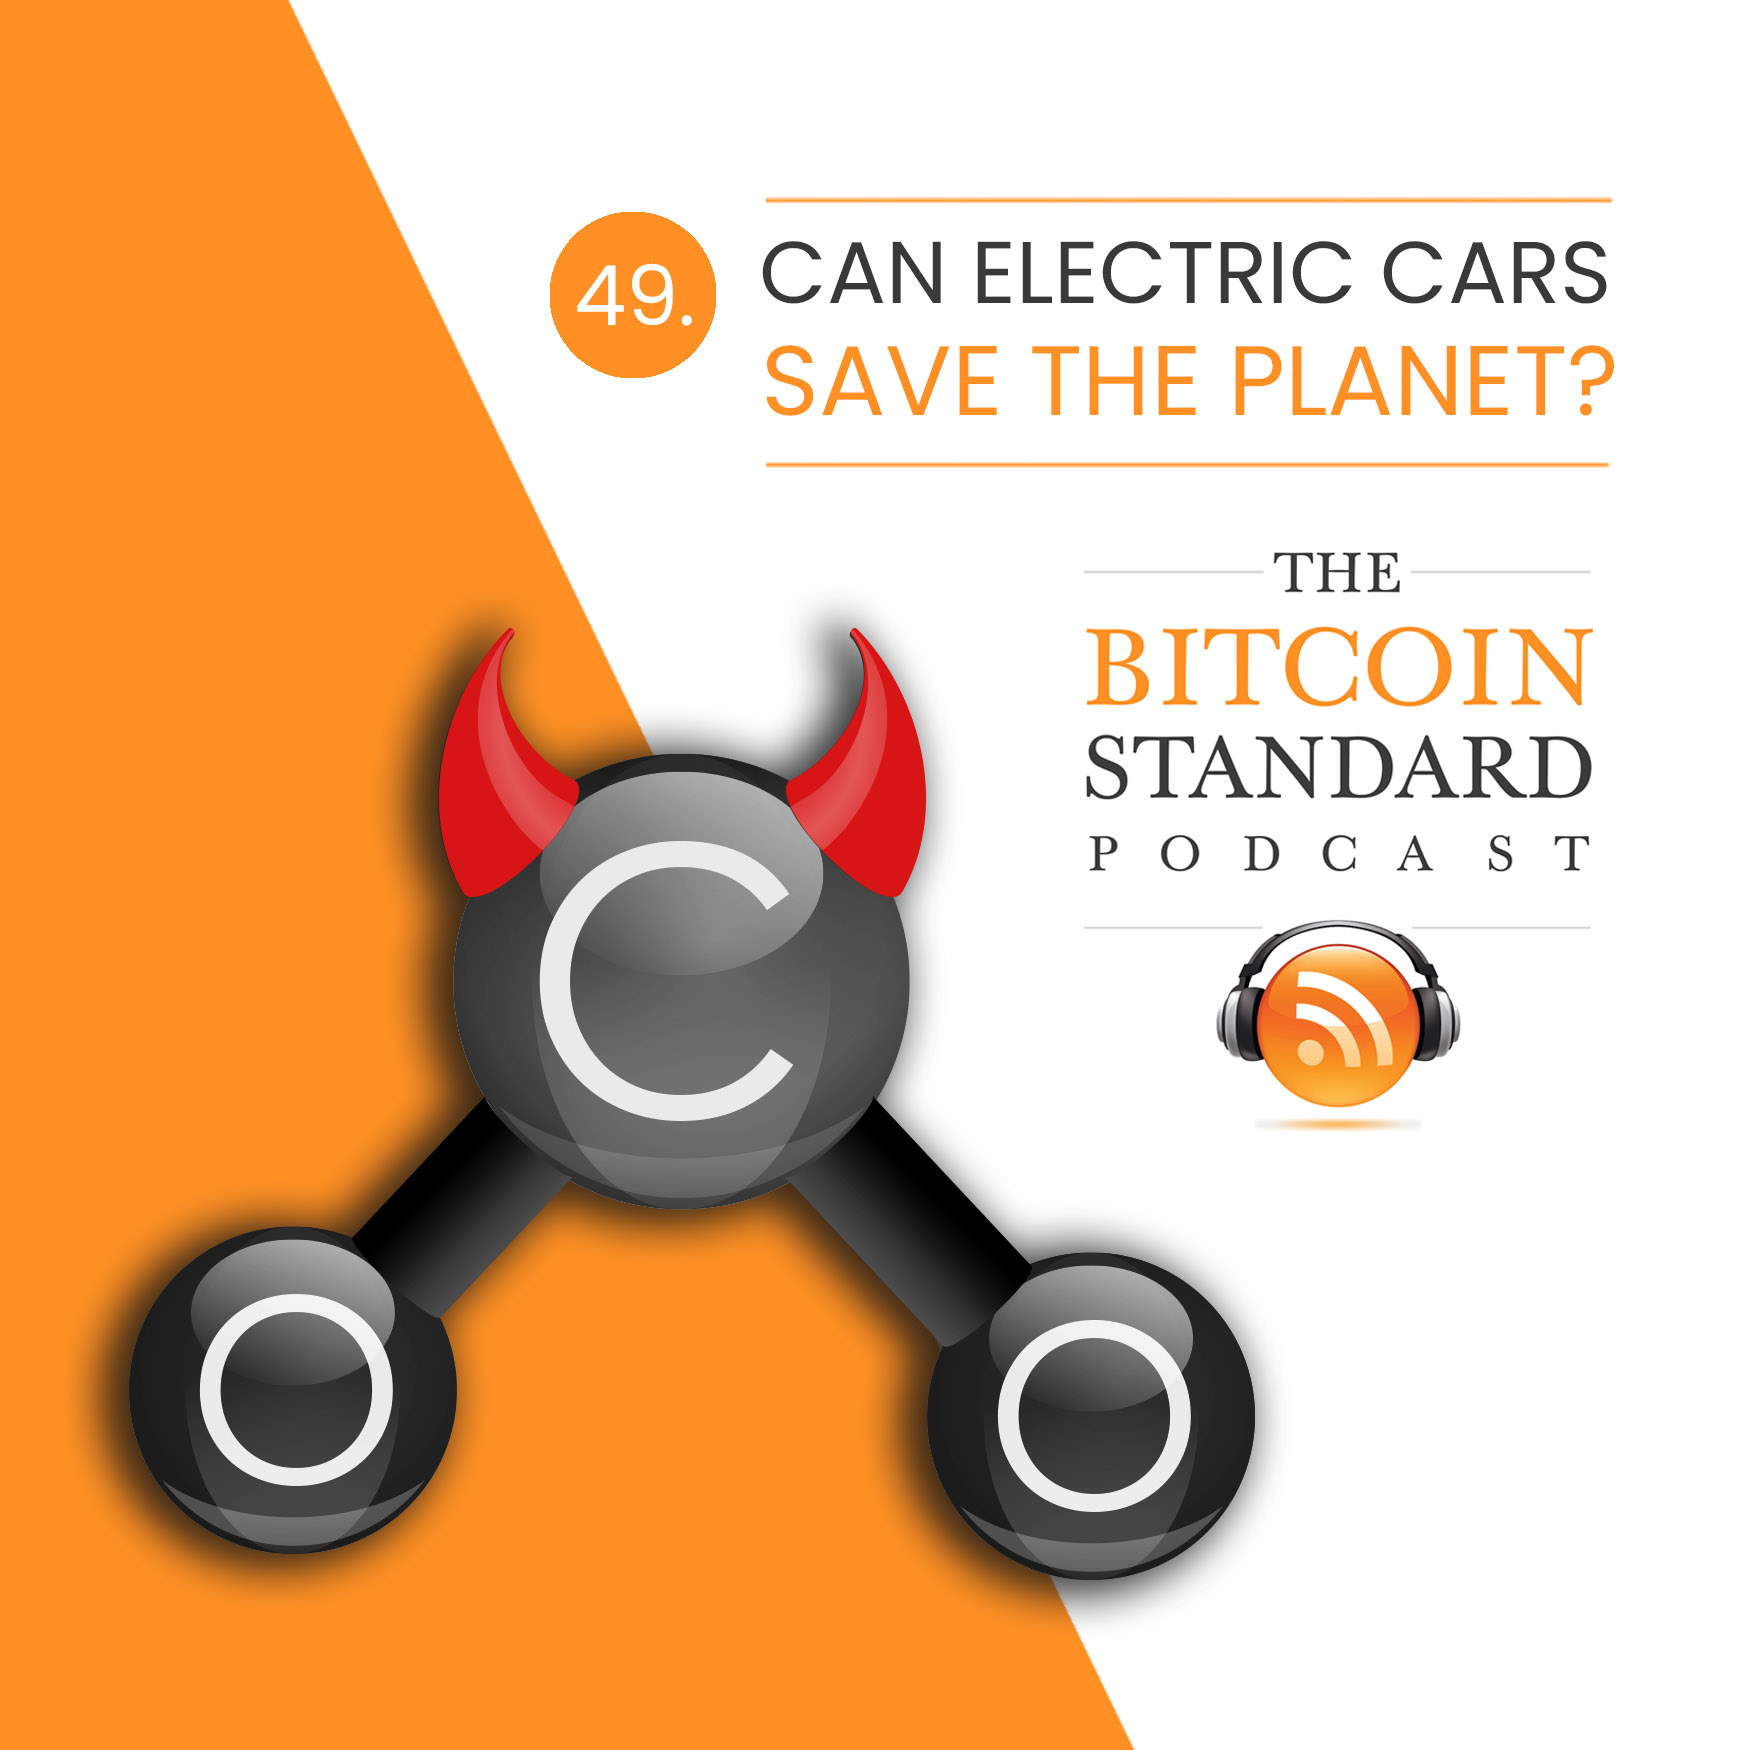 49. Can electric cars save the planet?